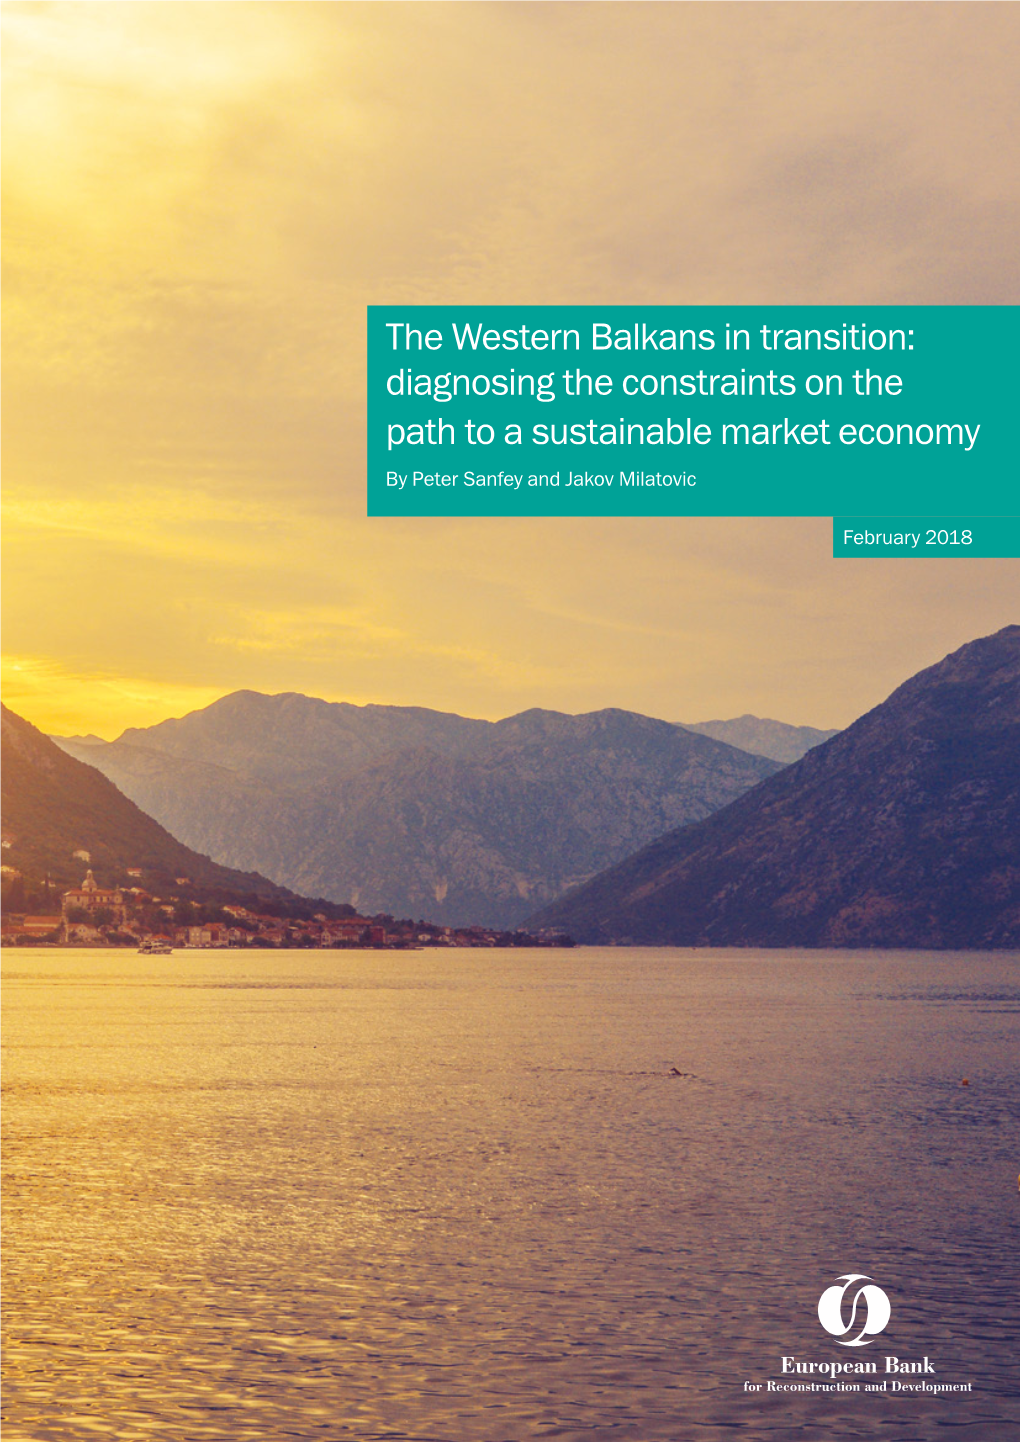 The Western Balkans in Transition: Diagnosing the Constraints on the Path to a Sustainable Market Economy by Peter Sanfey and Jakov Milatovic